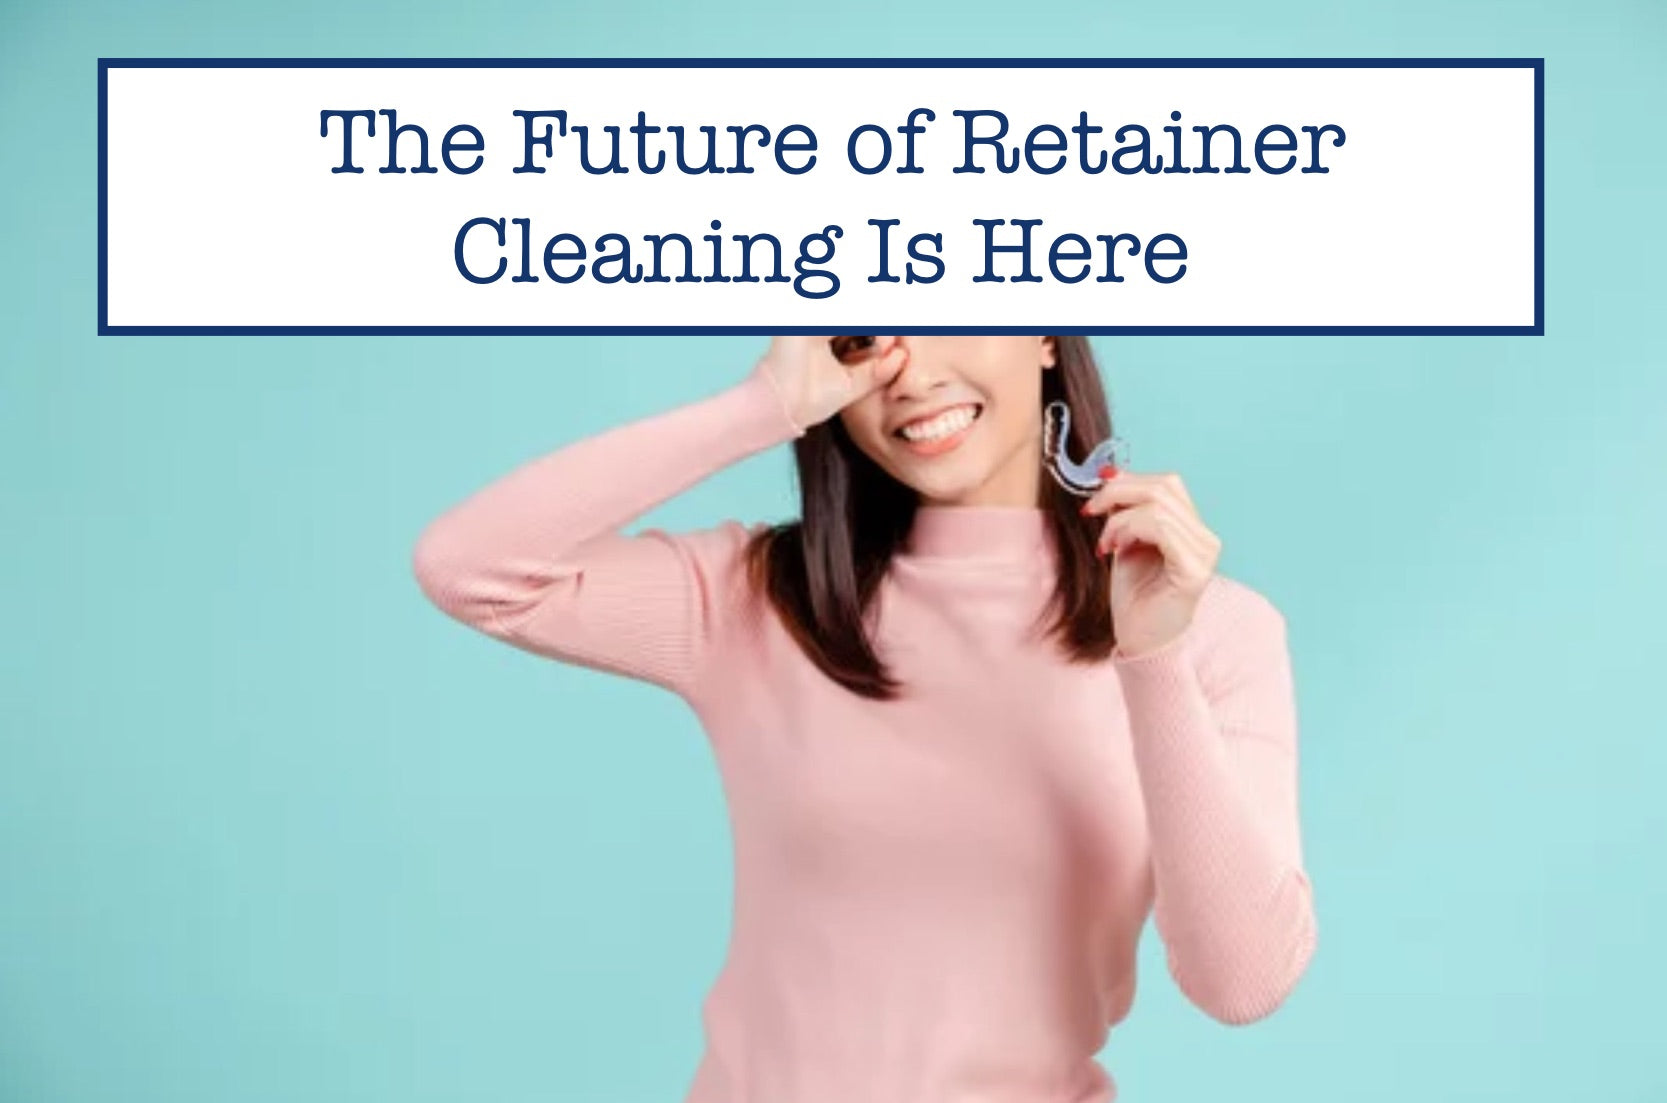 The Future of Retainer Cleaning Is Here